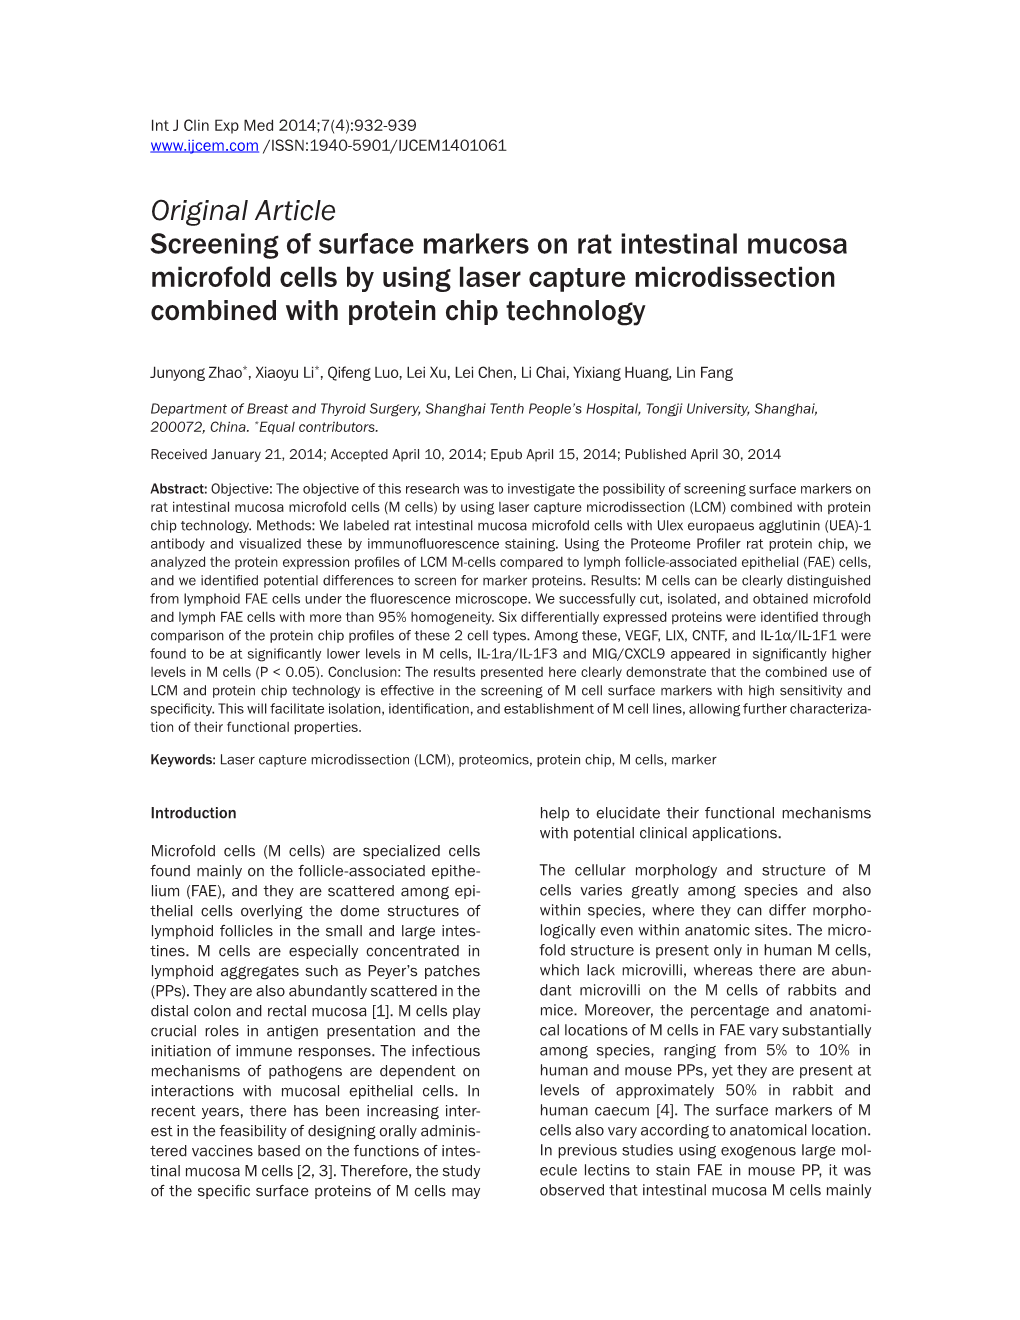 Screening of Surface Markers on Rat Intestinal Mucosa Microfold Cells by Using Laser Capture Microdissection Combined with Protein Chip Technology